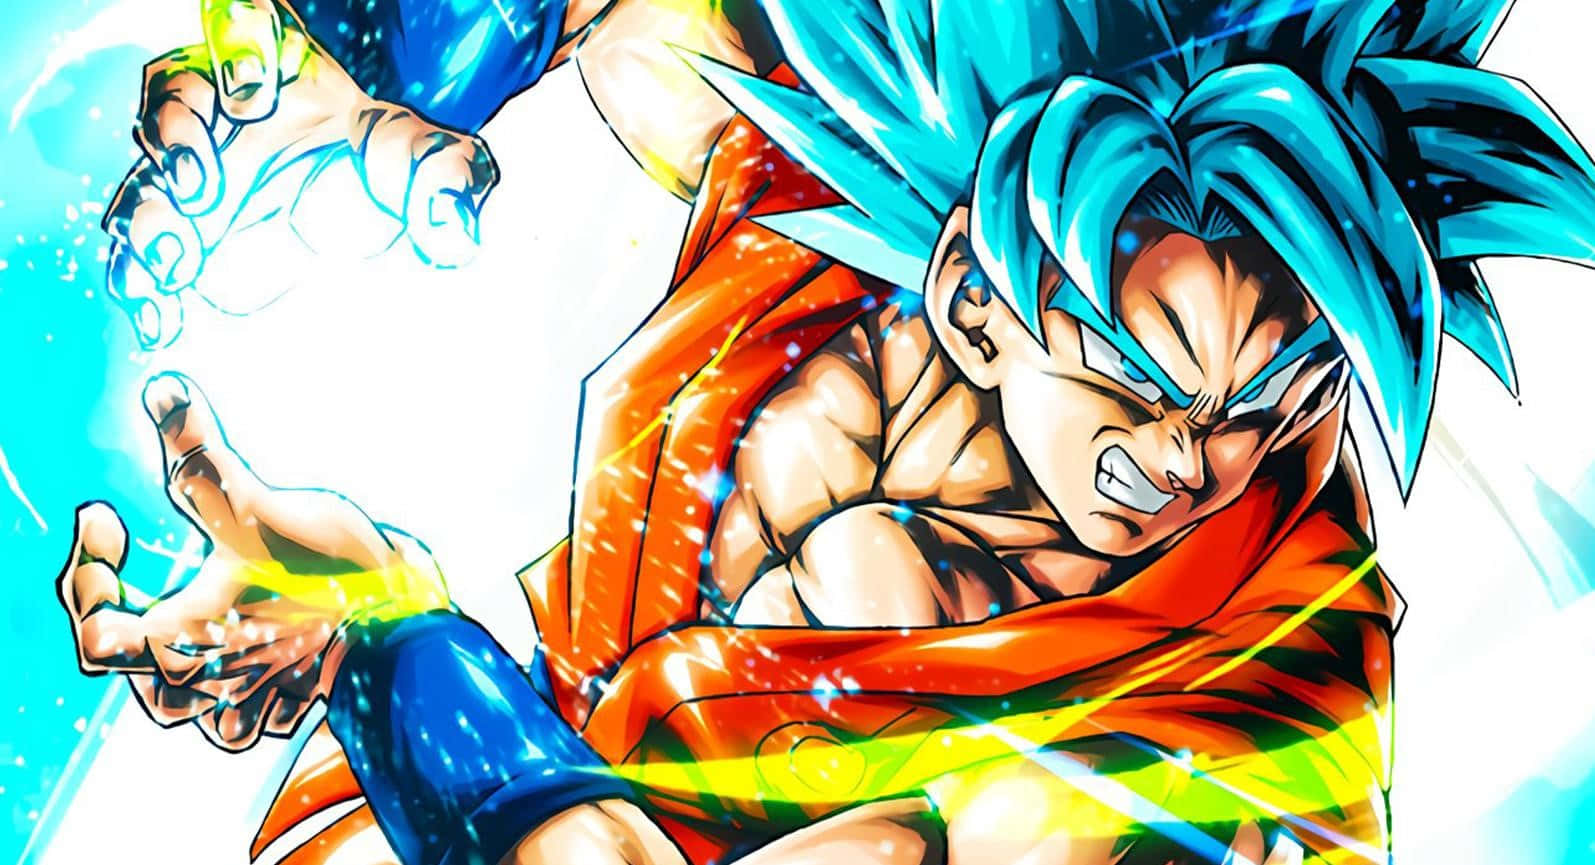 Rise up like the legendary Saiyan and fight for justice! Wallpaper